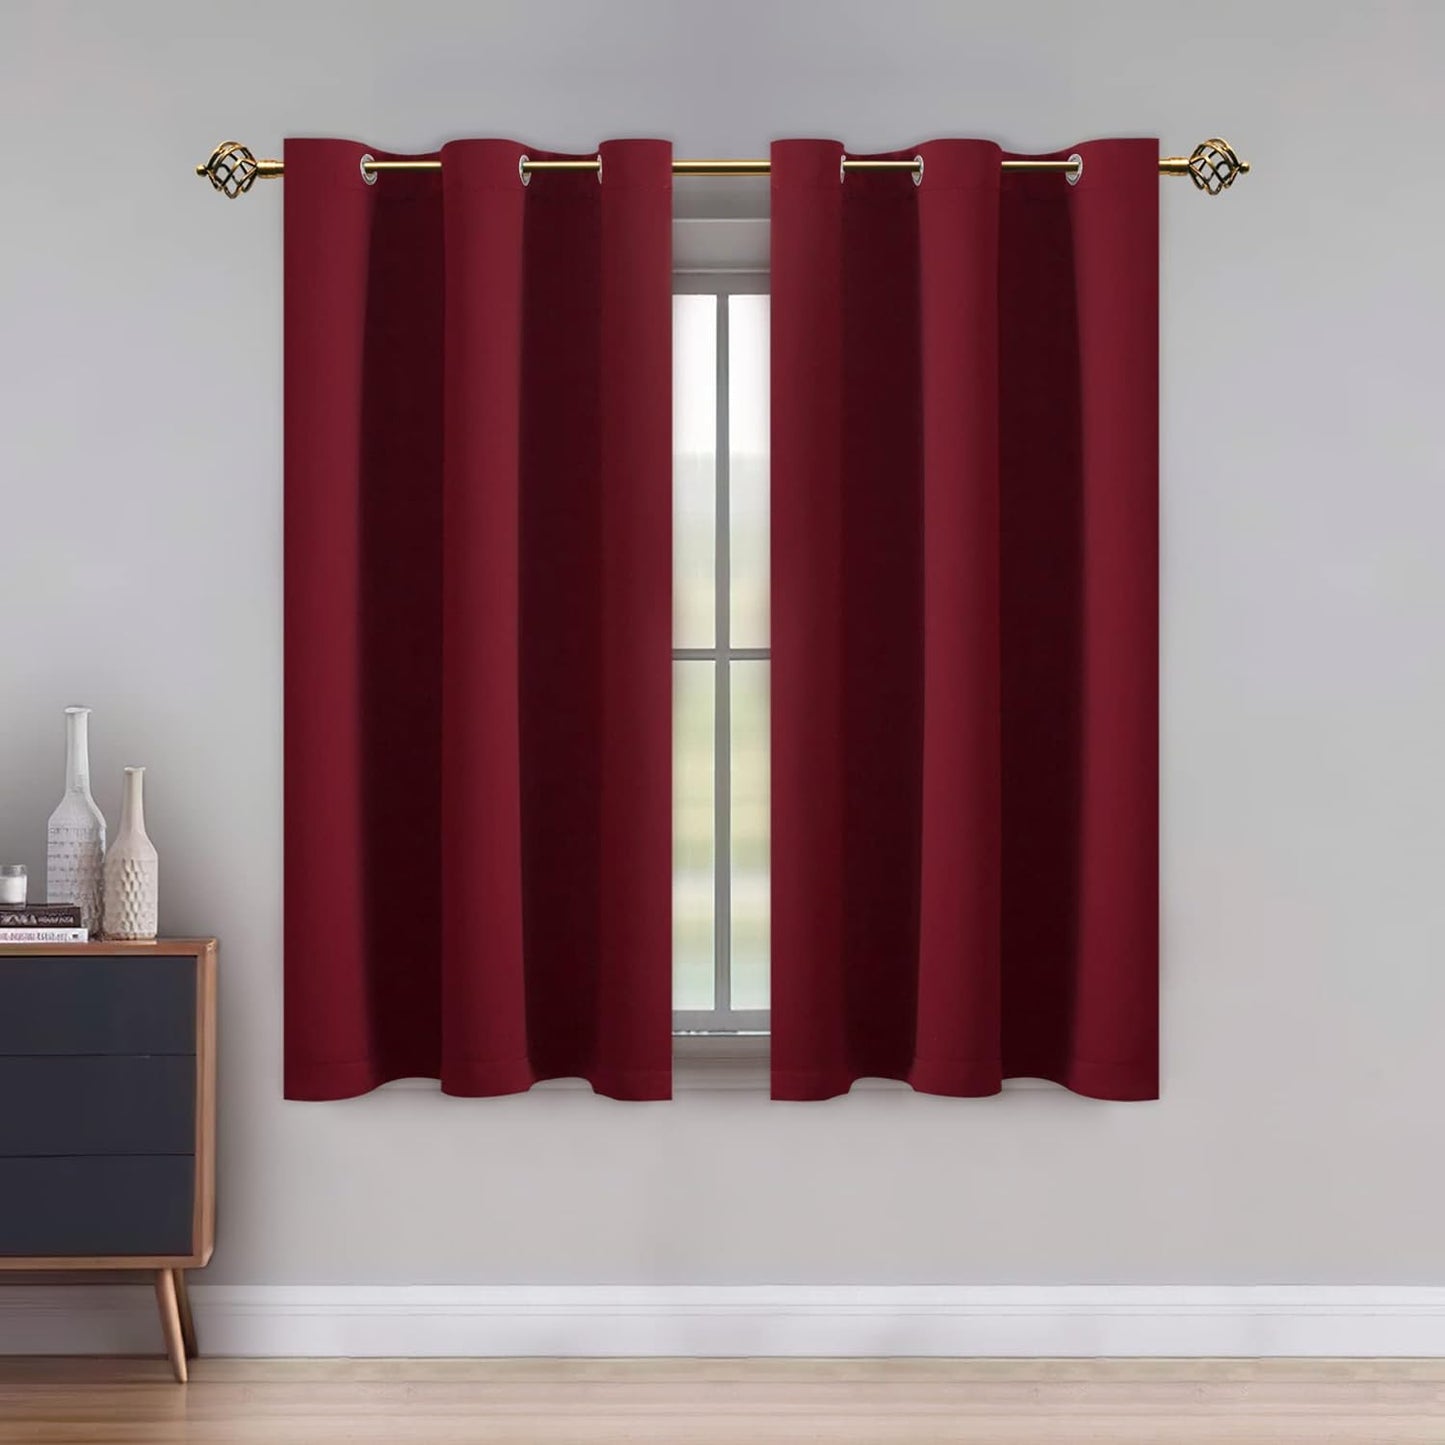 LUSHLEAF Blackout Curtains for Bedroom, Solid Thermal Insulated with Grommet Noise Reduction Window Drapes, Room Darkening Curtains for Living Room, 2 Panels, 52 X 63 Inch Grey  SHEEROOM Burgundy 42 X 45 Inch 